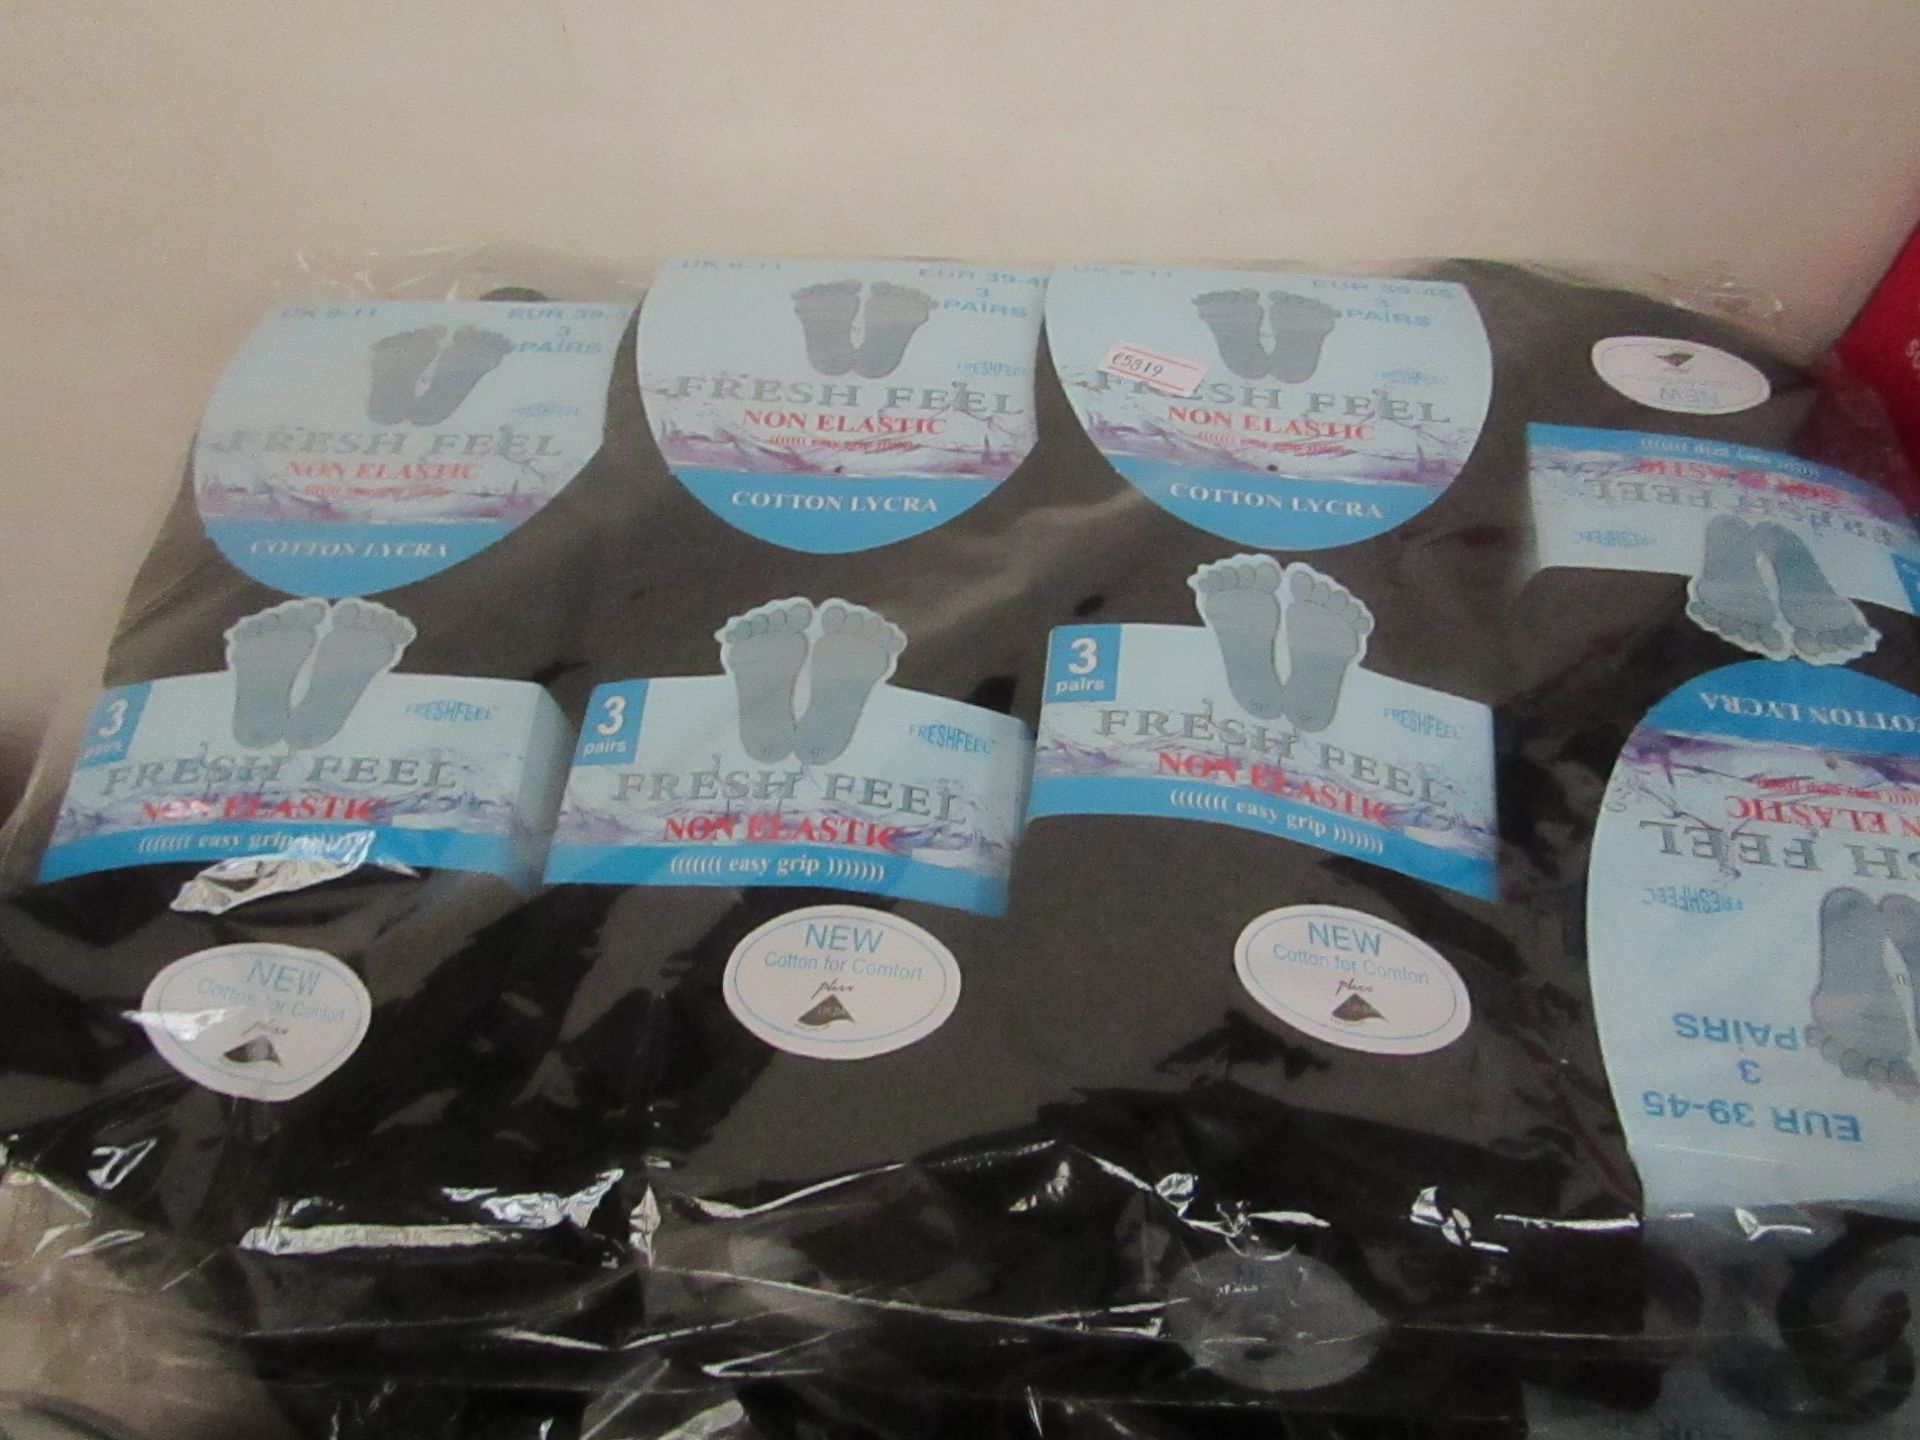 12x Pairs of Fresh Feel non-elastic socks, size Eur 39-45, new and packaged. - Image 2 of 2